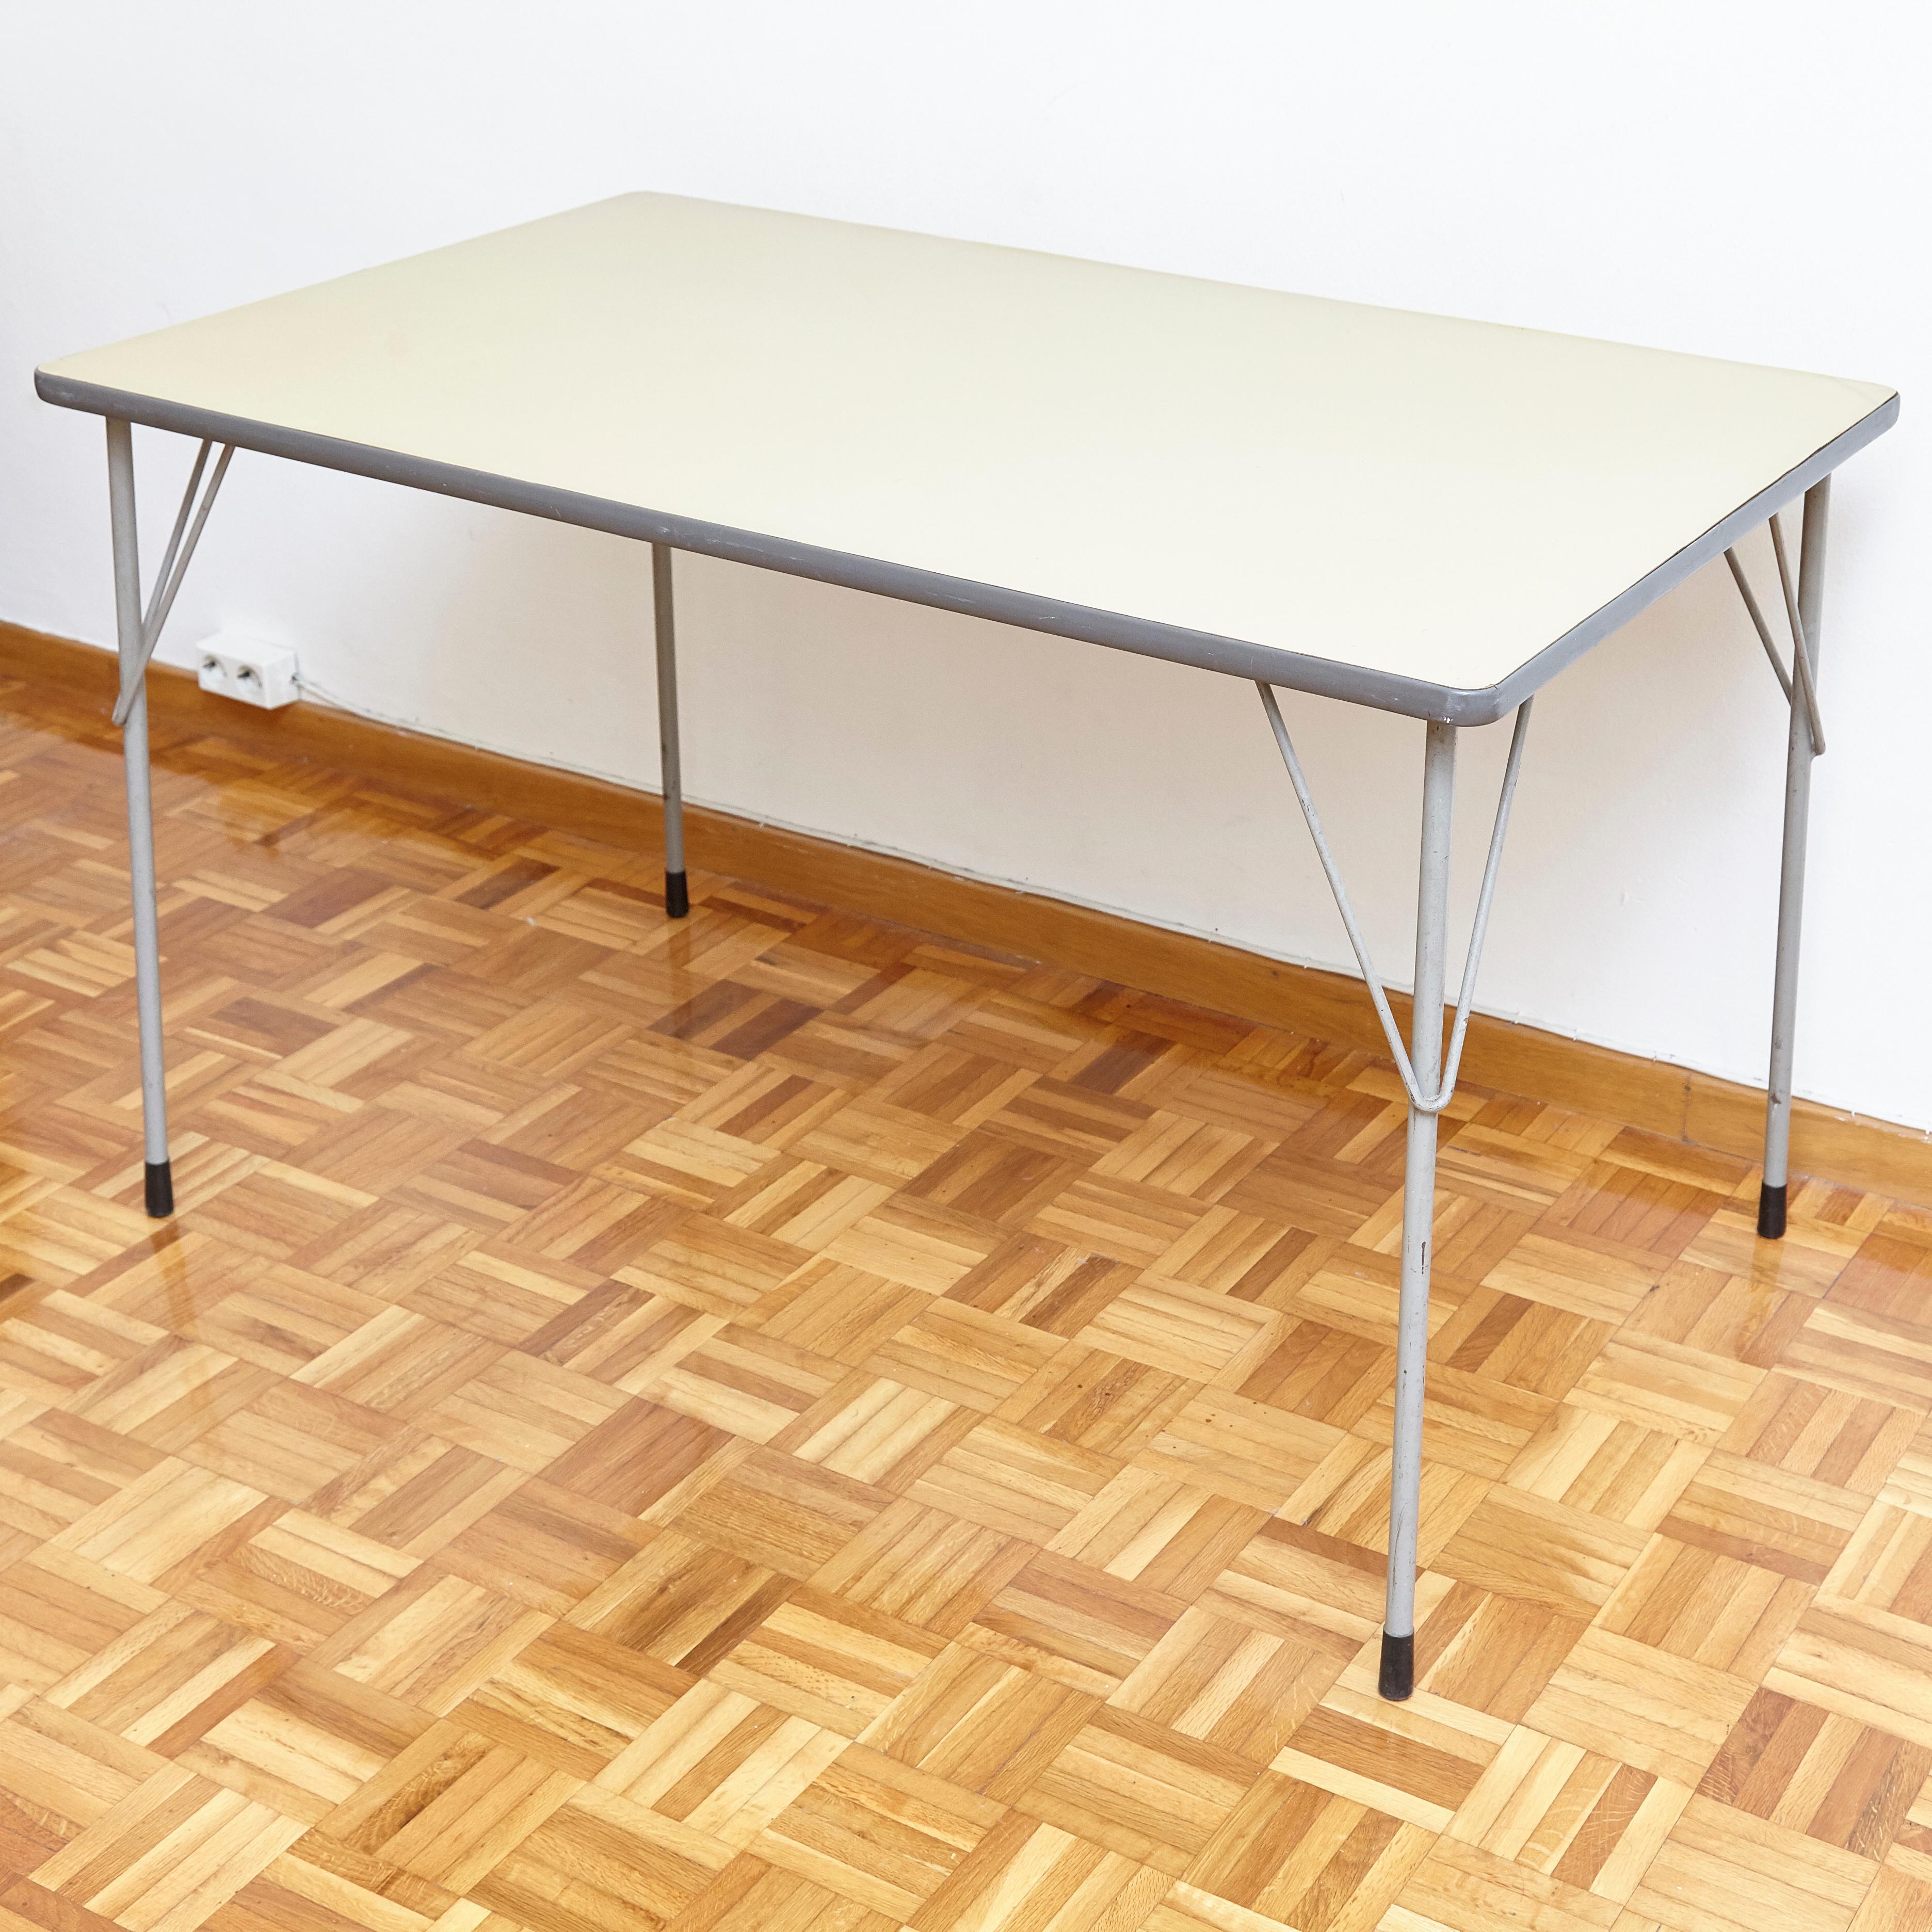 This table was designed by Wim Rietveld and manufactured by Ahrend de Cirkel in the Netherlands in, circa 1960. 
The table has a steel frame. 
It remains in a good vintage condition, with wear consistent with age and use.